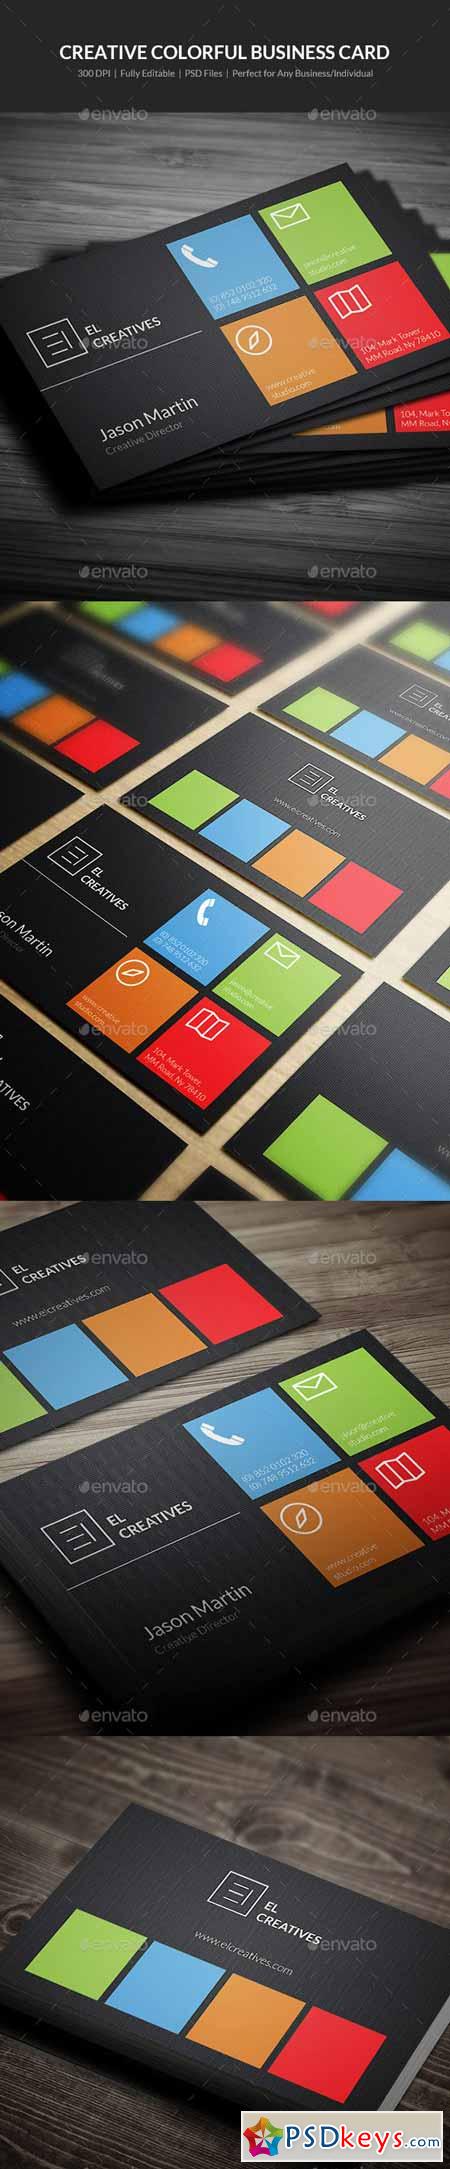 Creative Colorful Business Card - 02 13198500